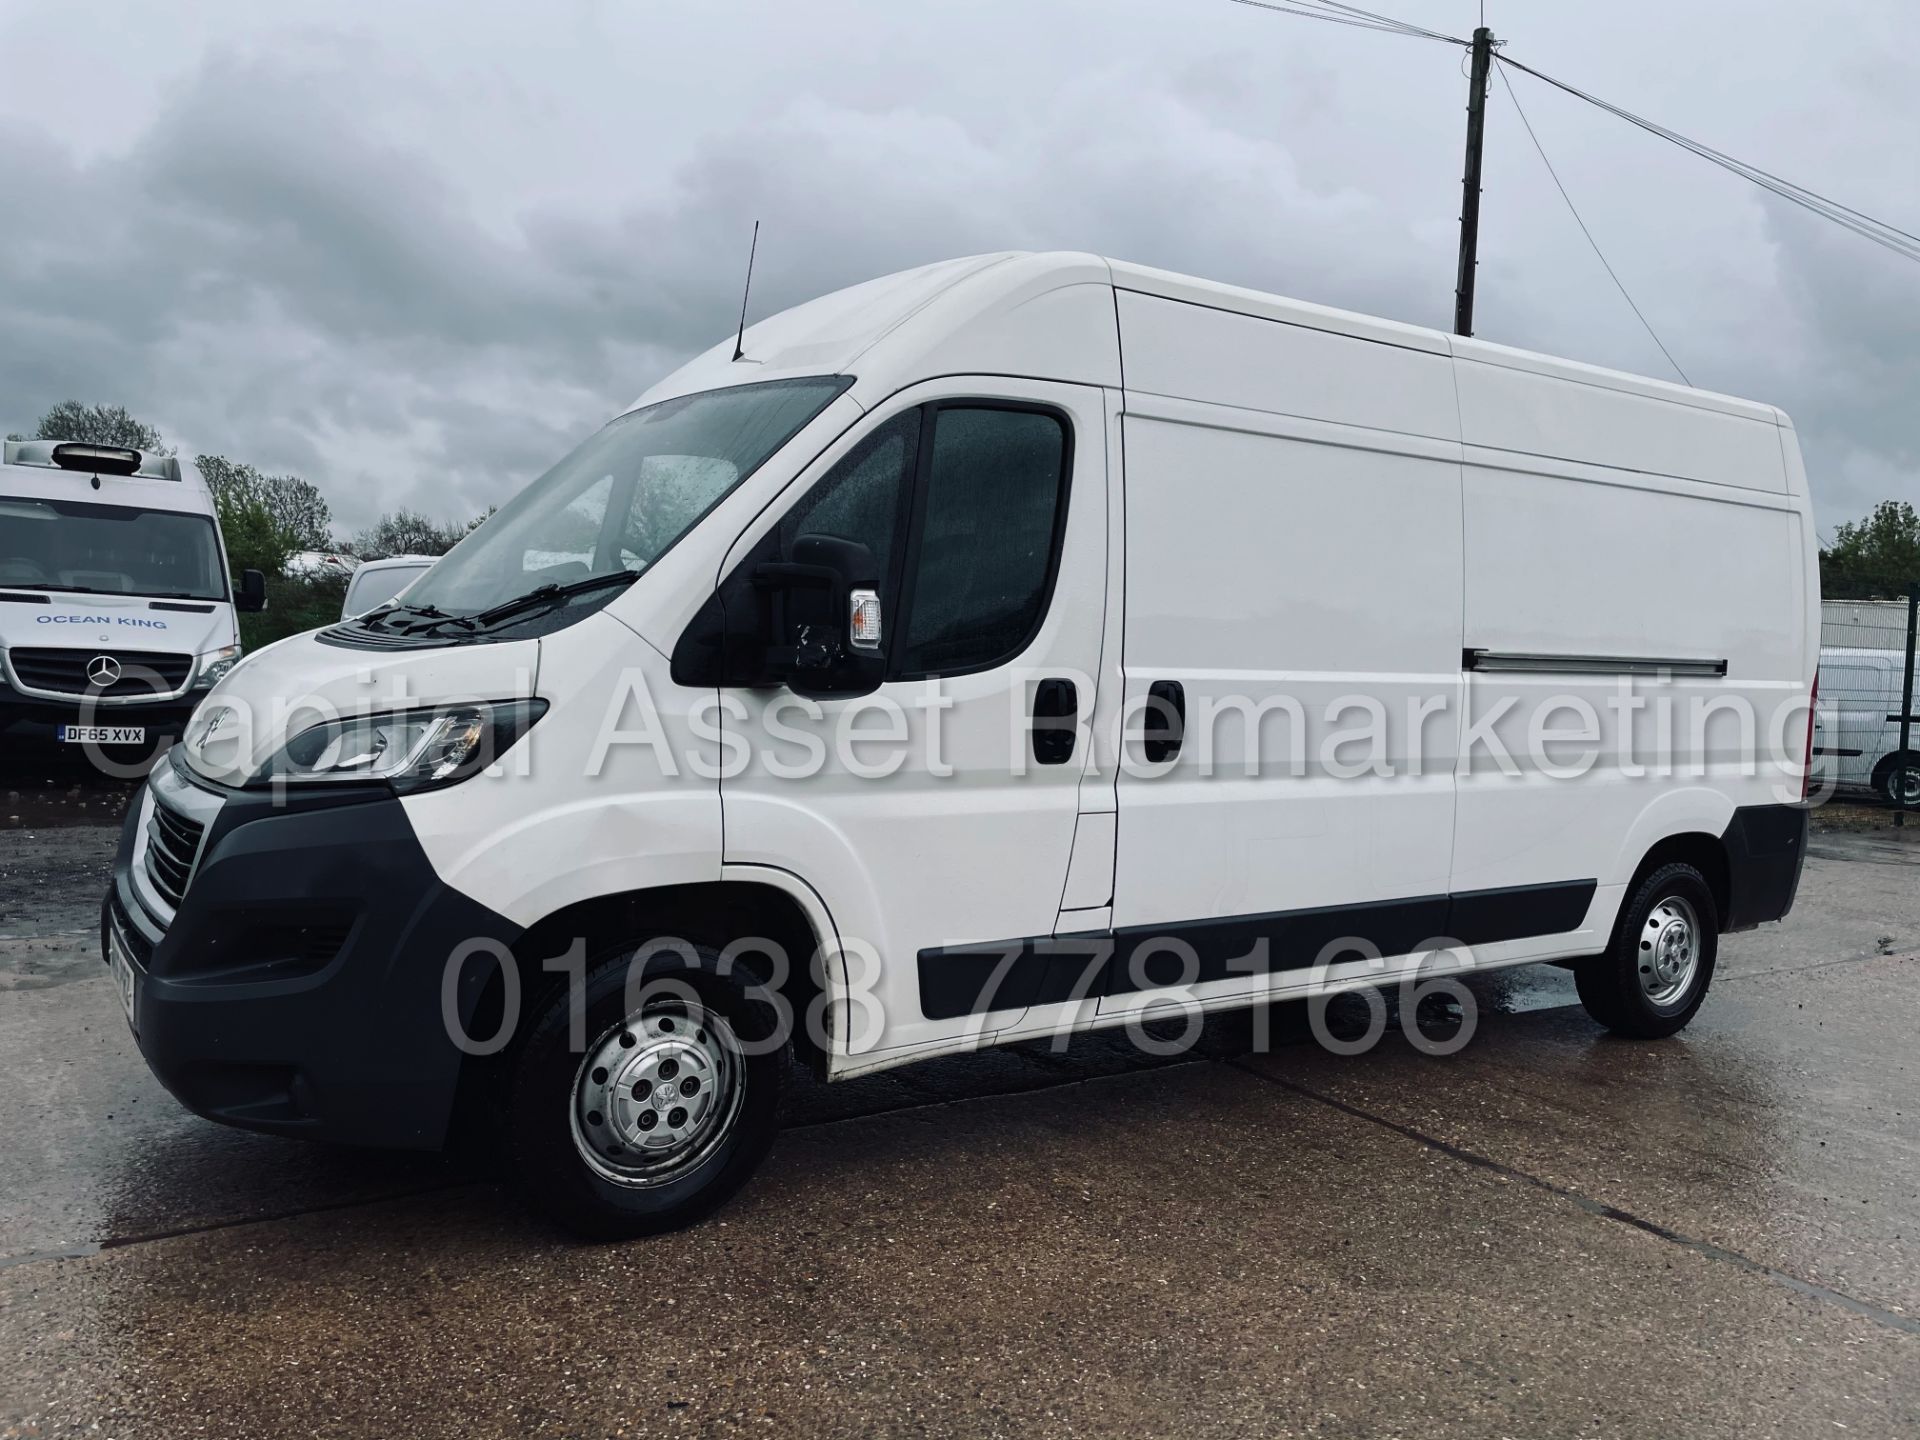 (On Sale) PEUGEOT BOXER 335 *PROFESSIONAL* LWB HI-ROOF (2016) '2.2 HDI - 6 SPEED' *A/C* (1 OWNER) - Image 7 of 41